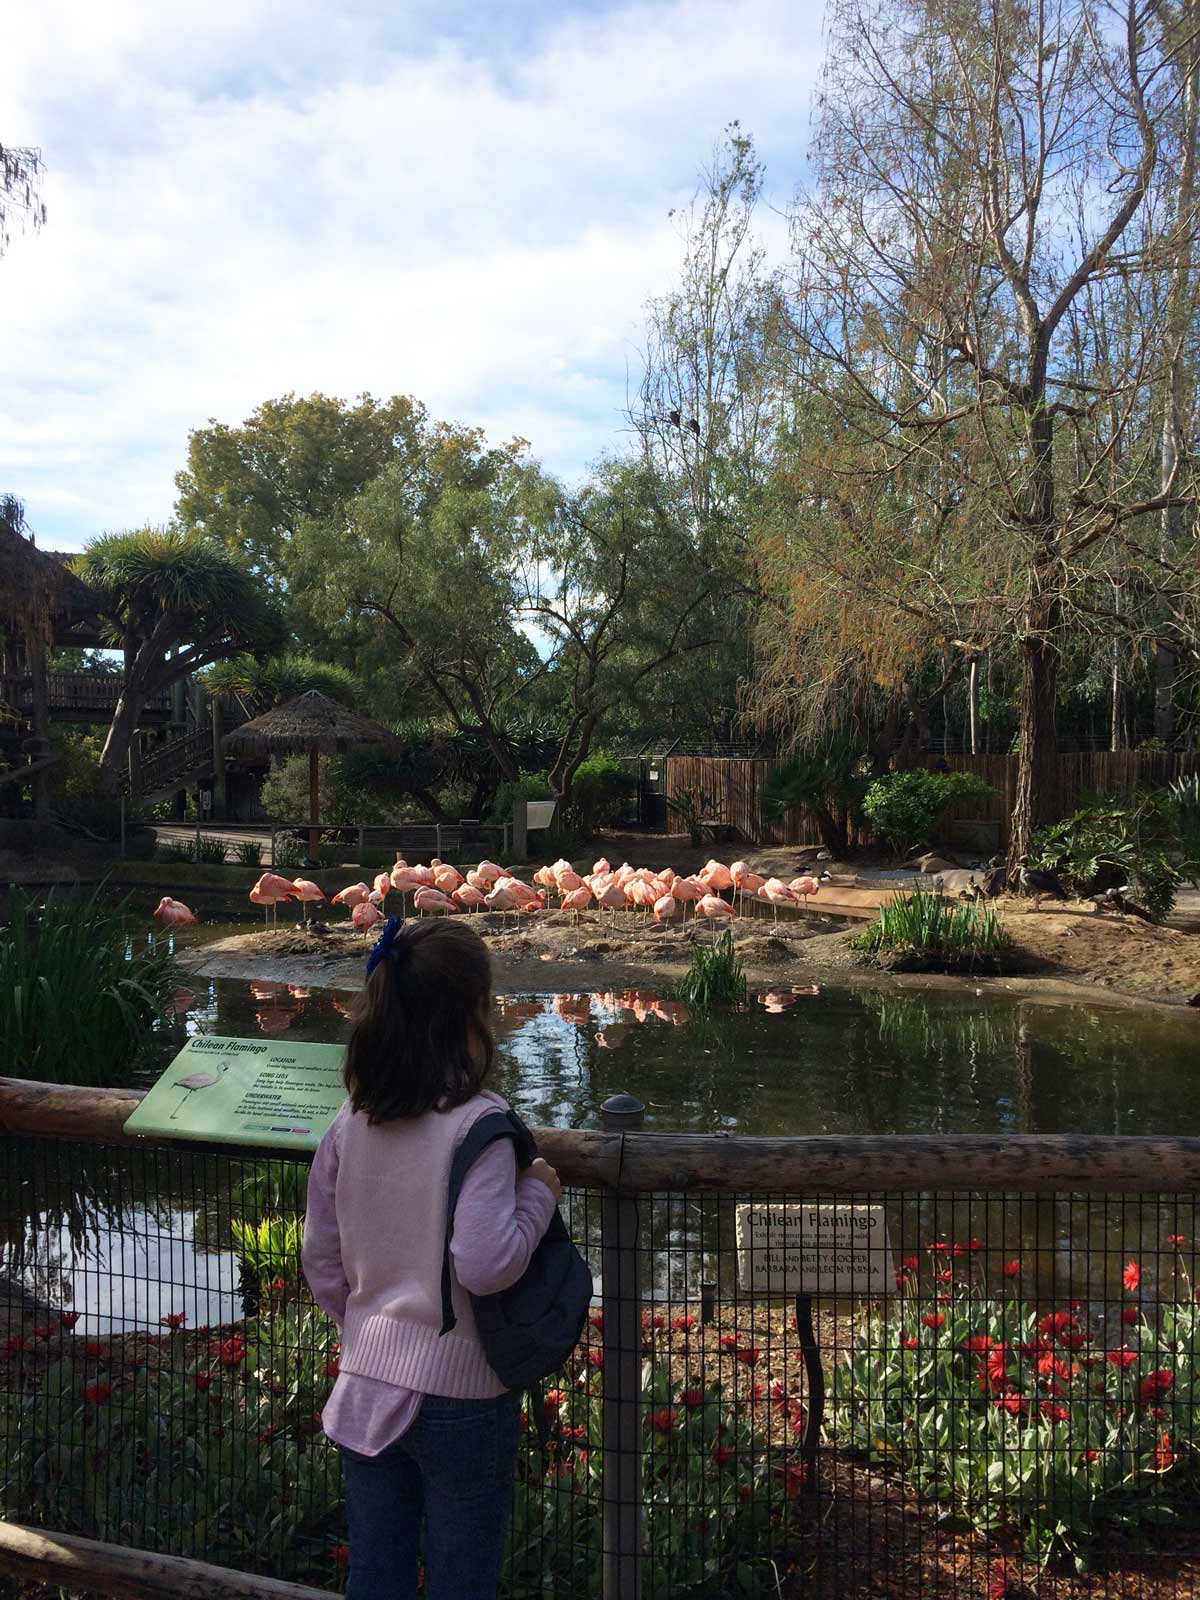 girl in a pink sweater watching the flamingos at the zoo on a sunny day.